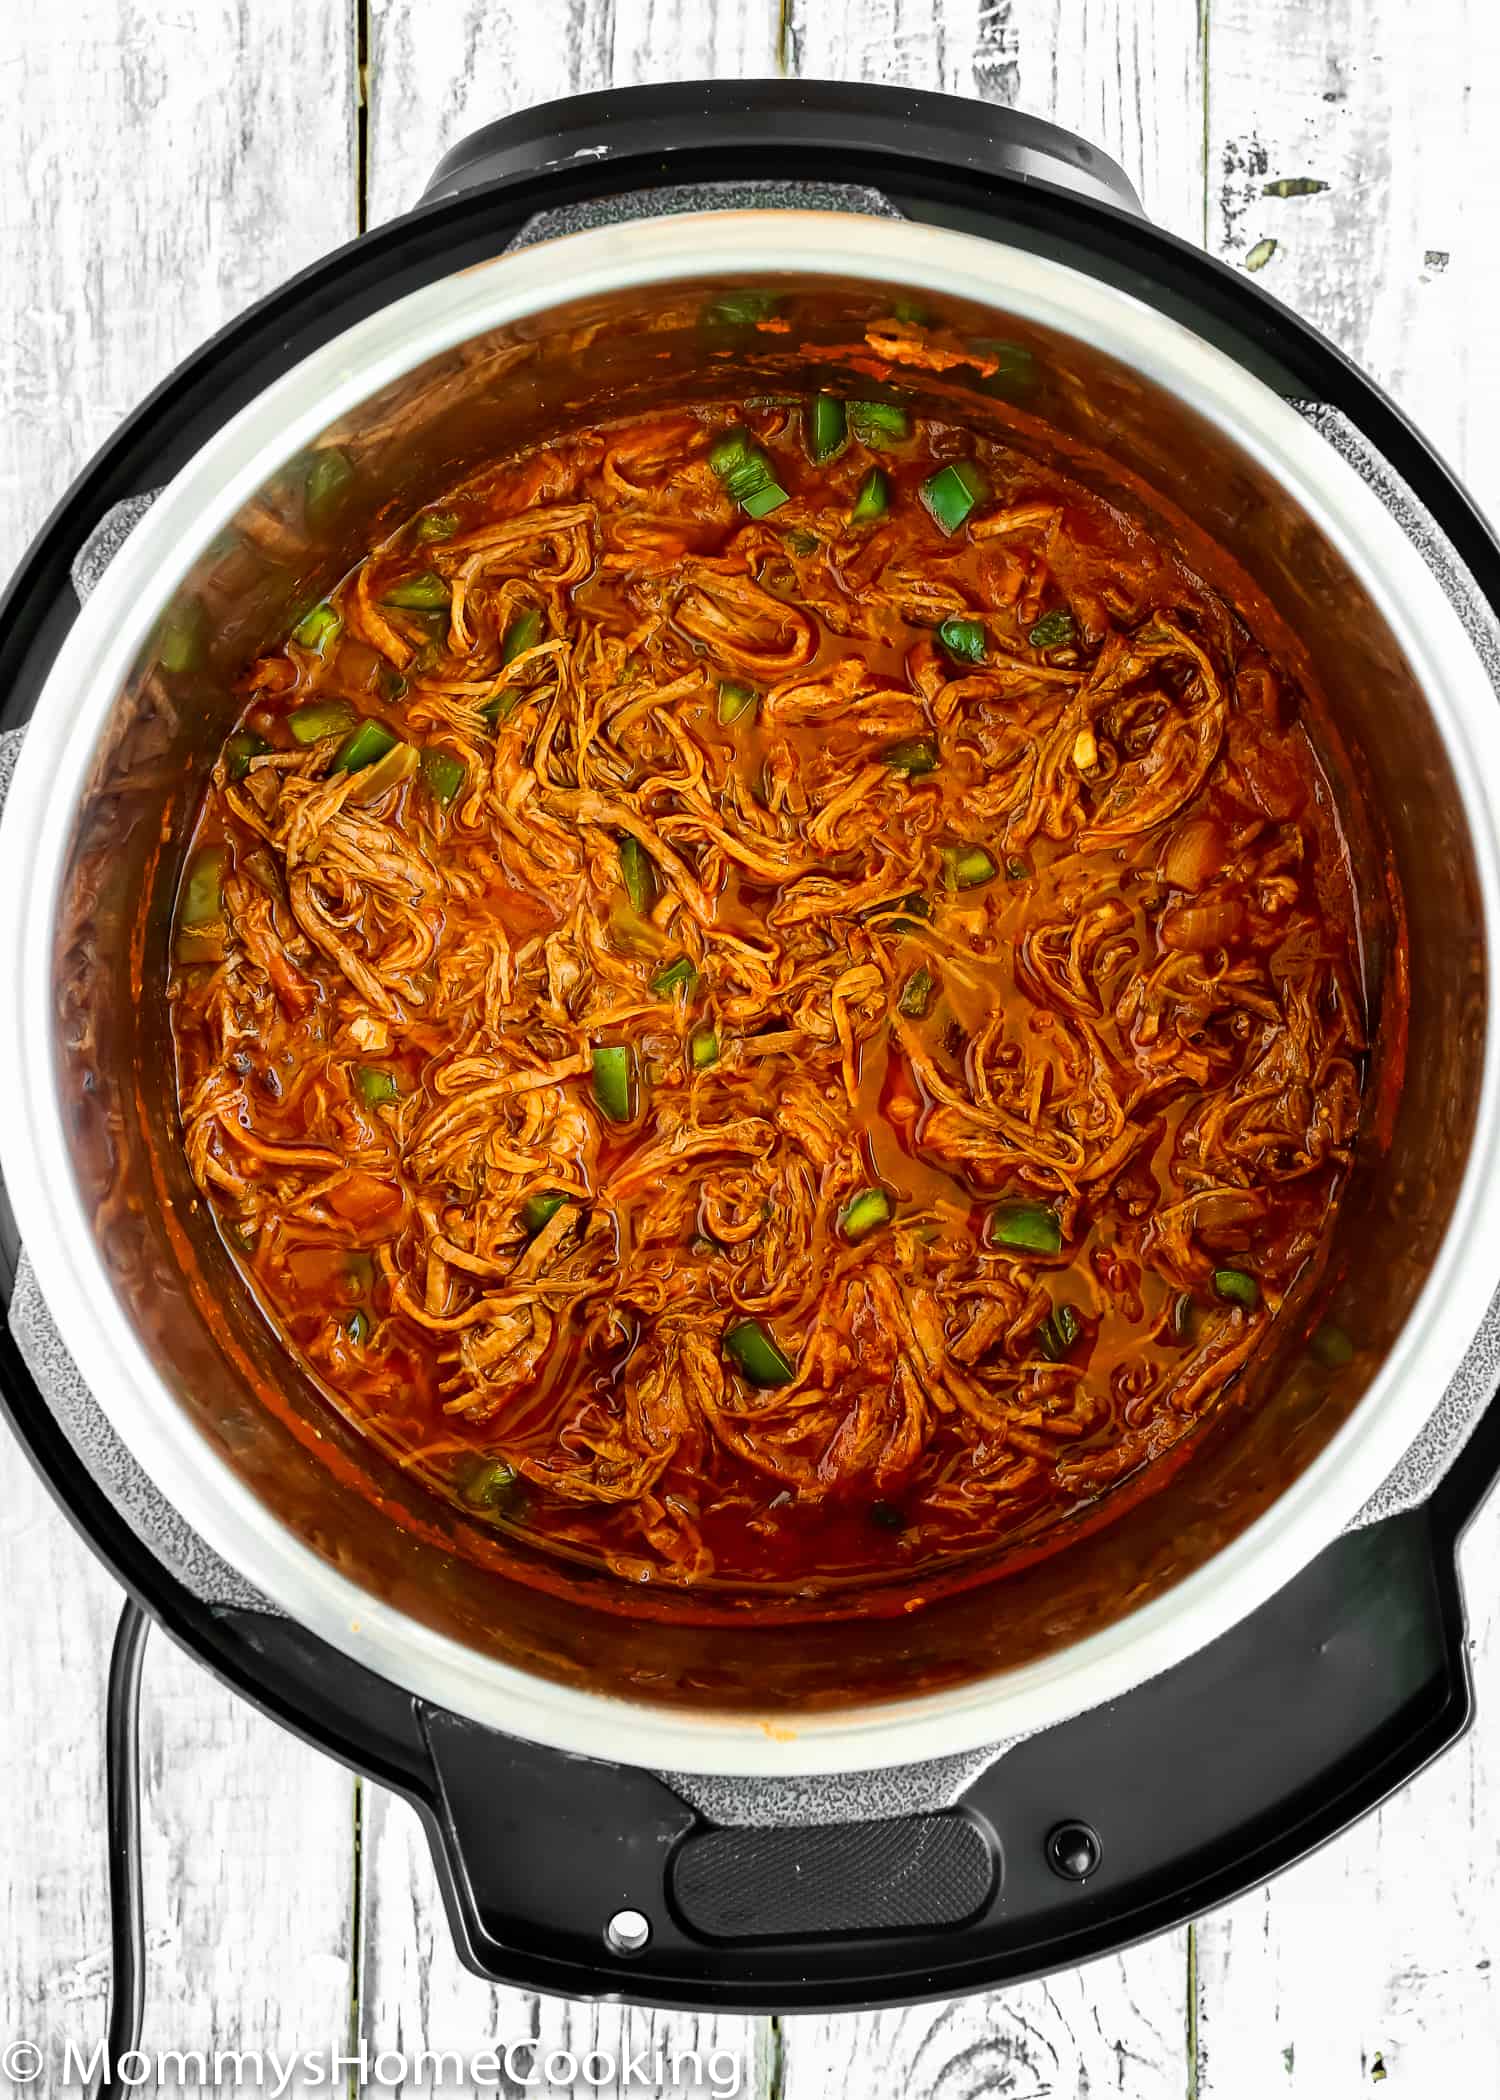 This Instant Pot Venezuelan Shredded Beef is beyond delicious! Made quick and easy in the Instant Pot, this shredded beef is fantastic for tacos, arepas, burritos, empanadas, quesadillas, sliders or just served on rice or mashed potatoes. https://mommyshomecooking.com